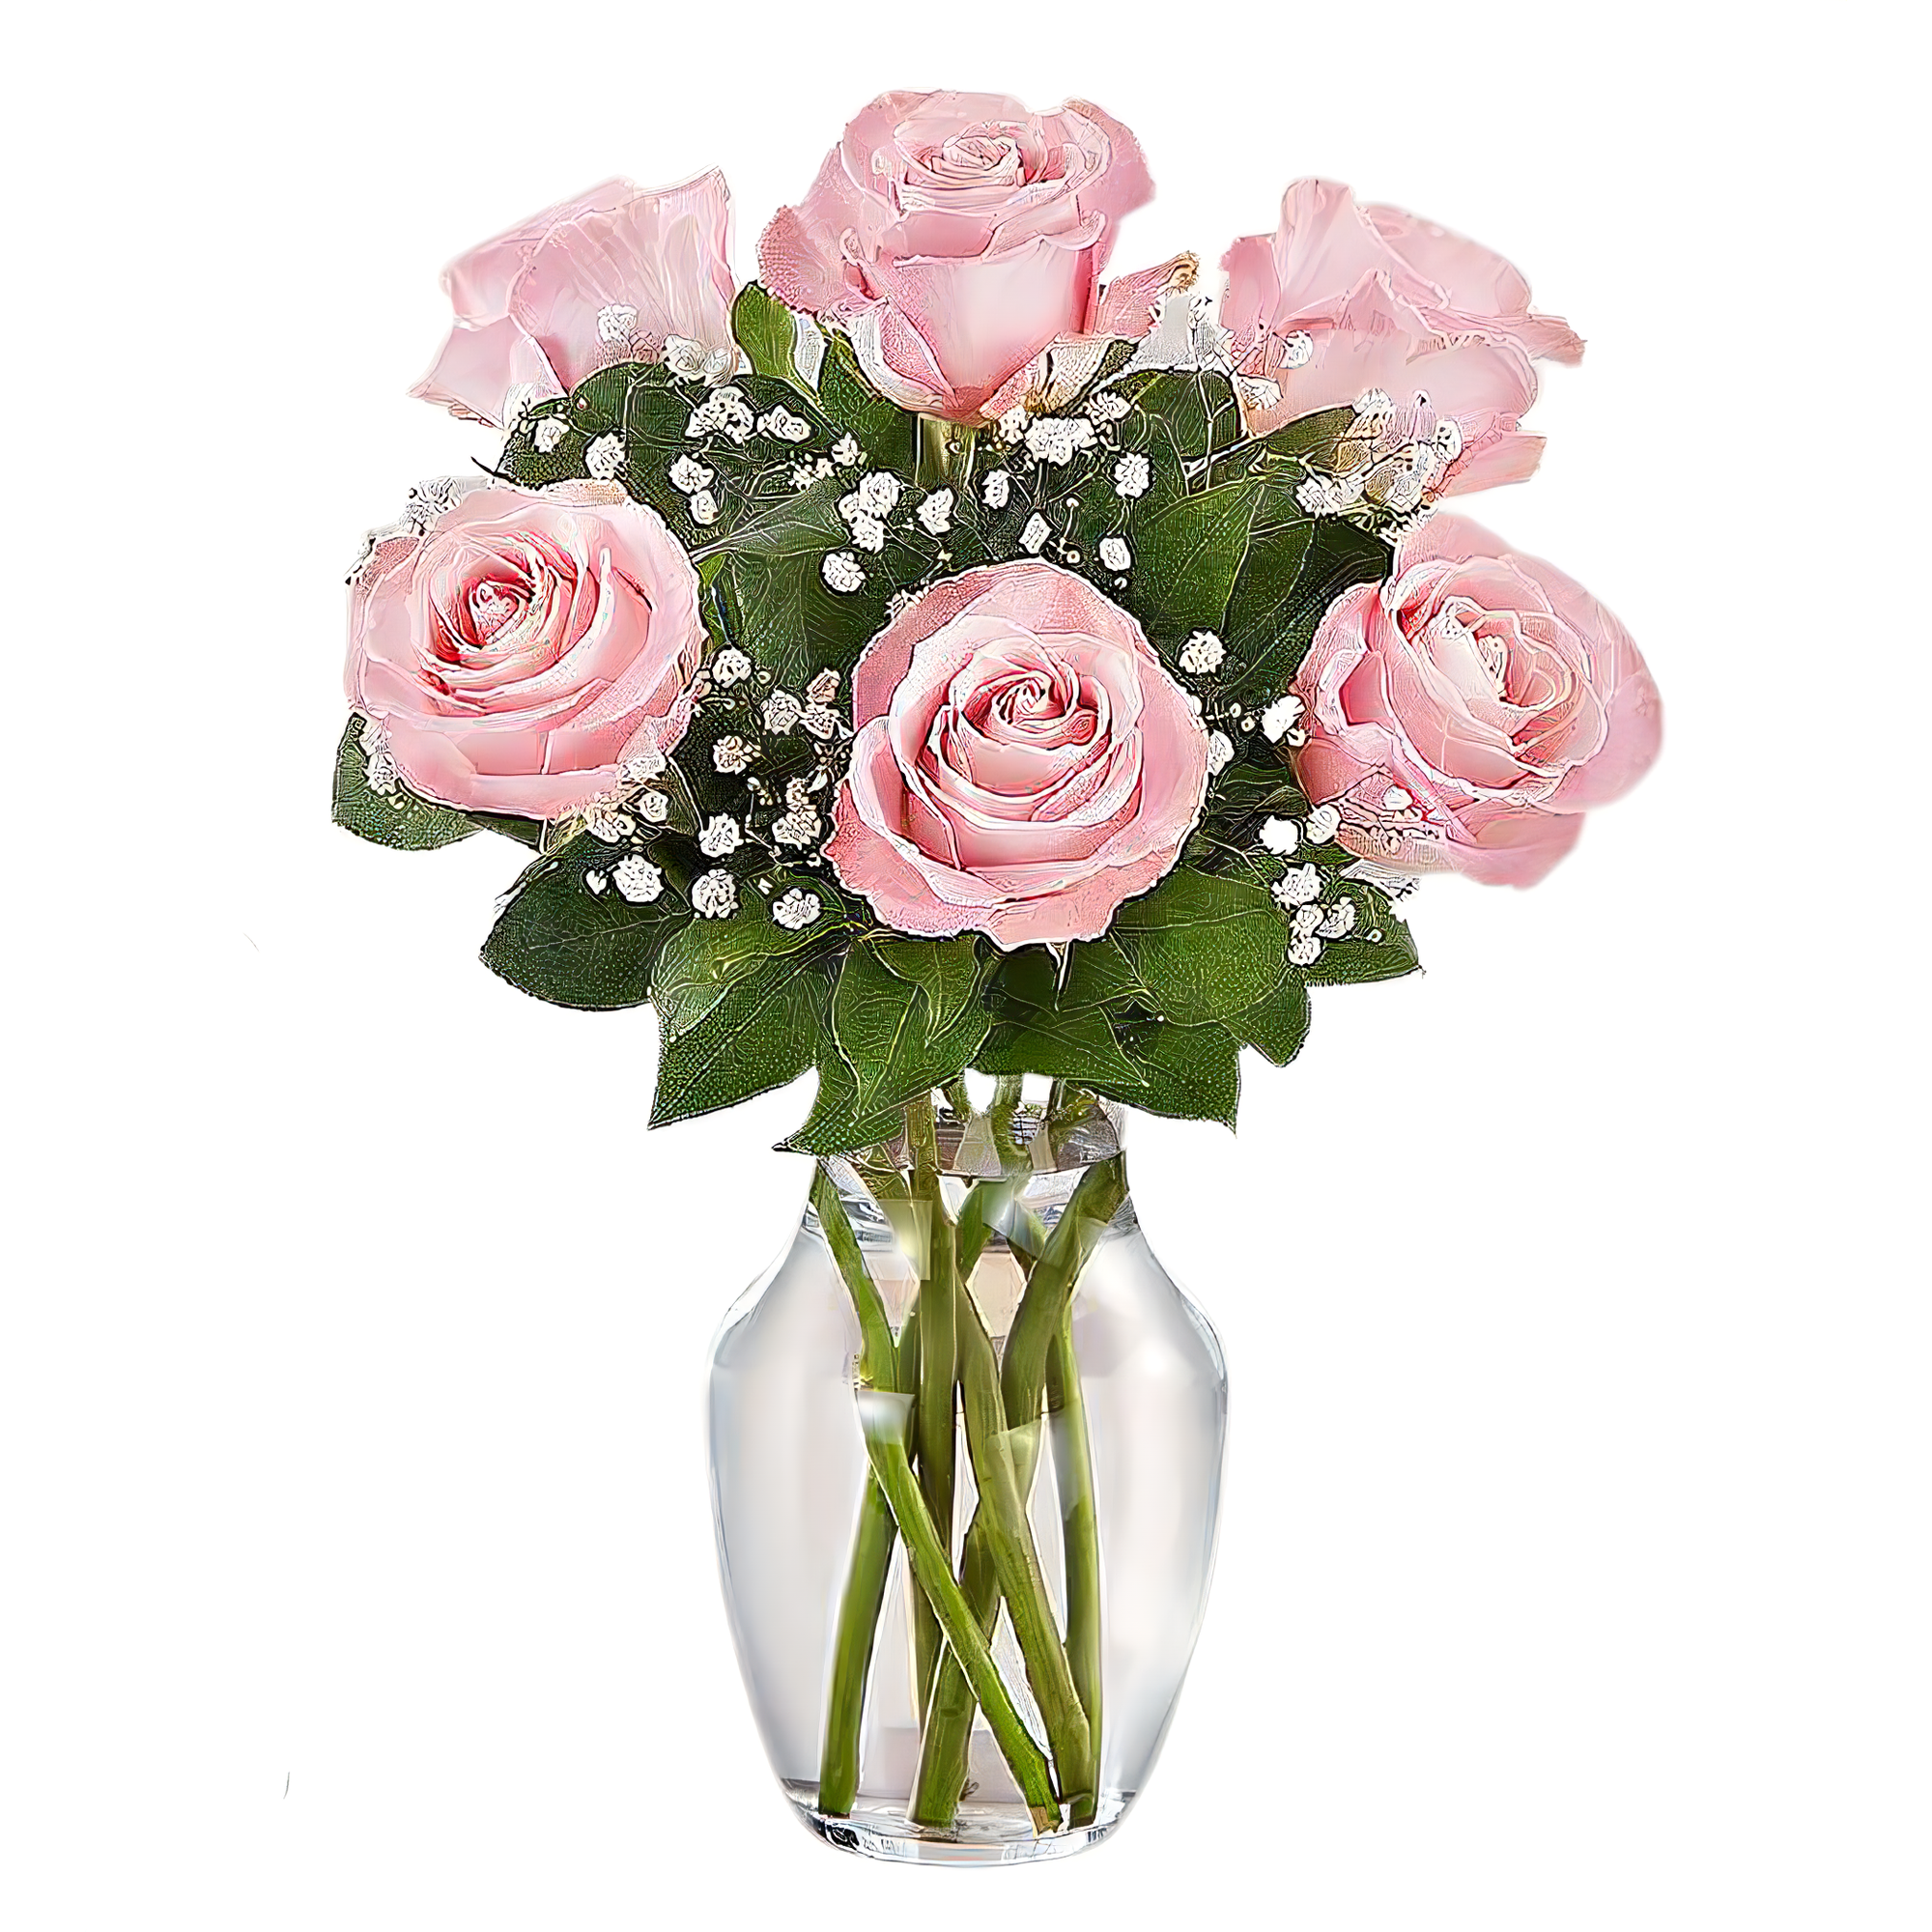 Manhattan Flower Delivery - Love's Embrace Roses Pink - Roses